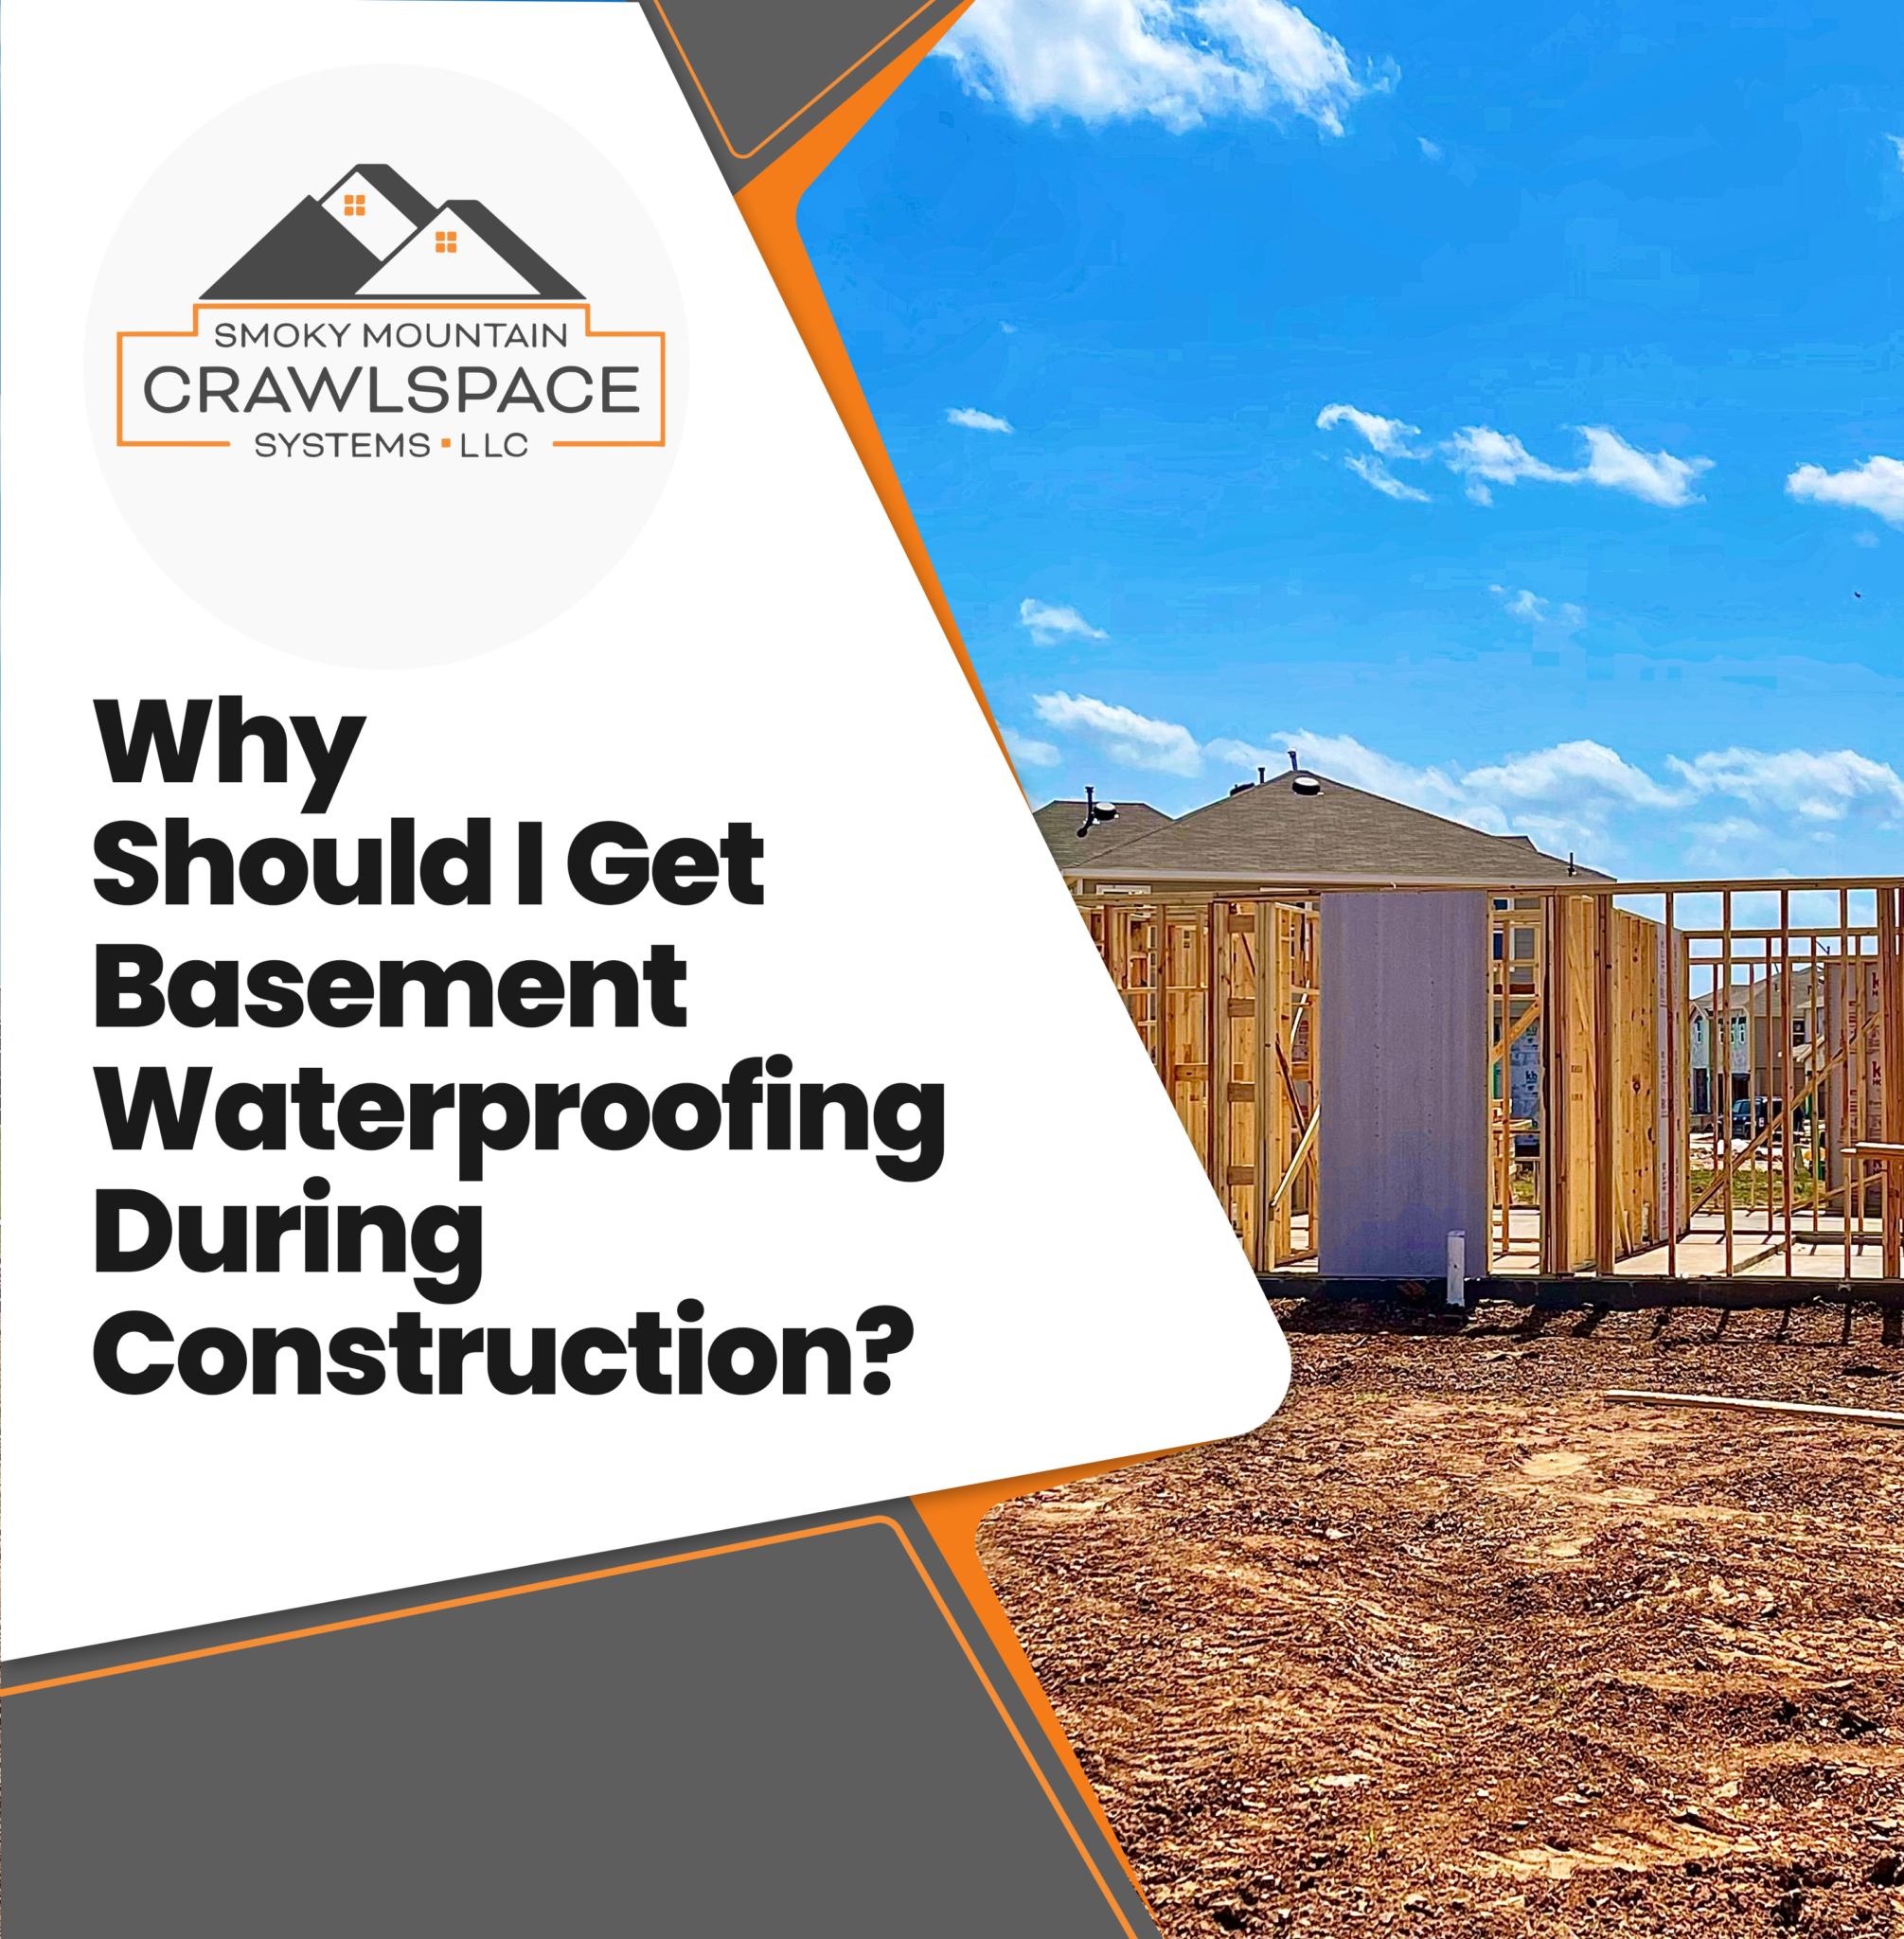 Smoky-Mountain-Crawl-Space-Systems-Why-Should-I-Get-Waterproofing-During-Construction